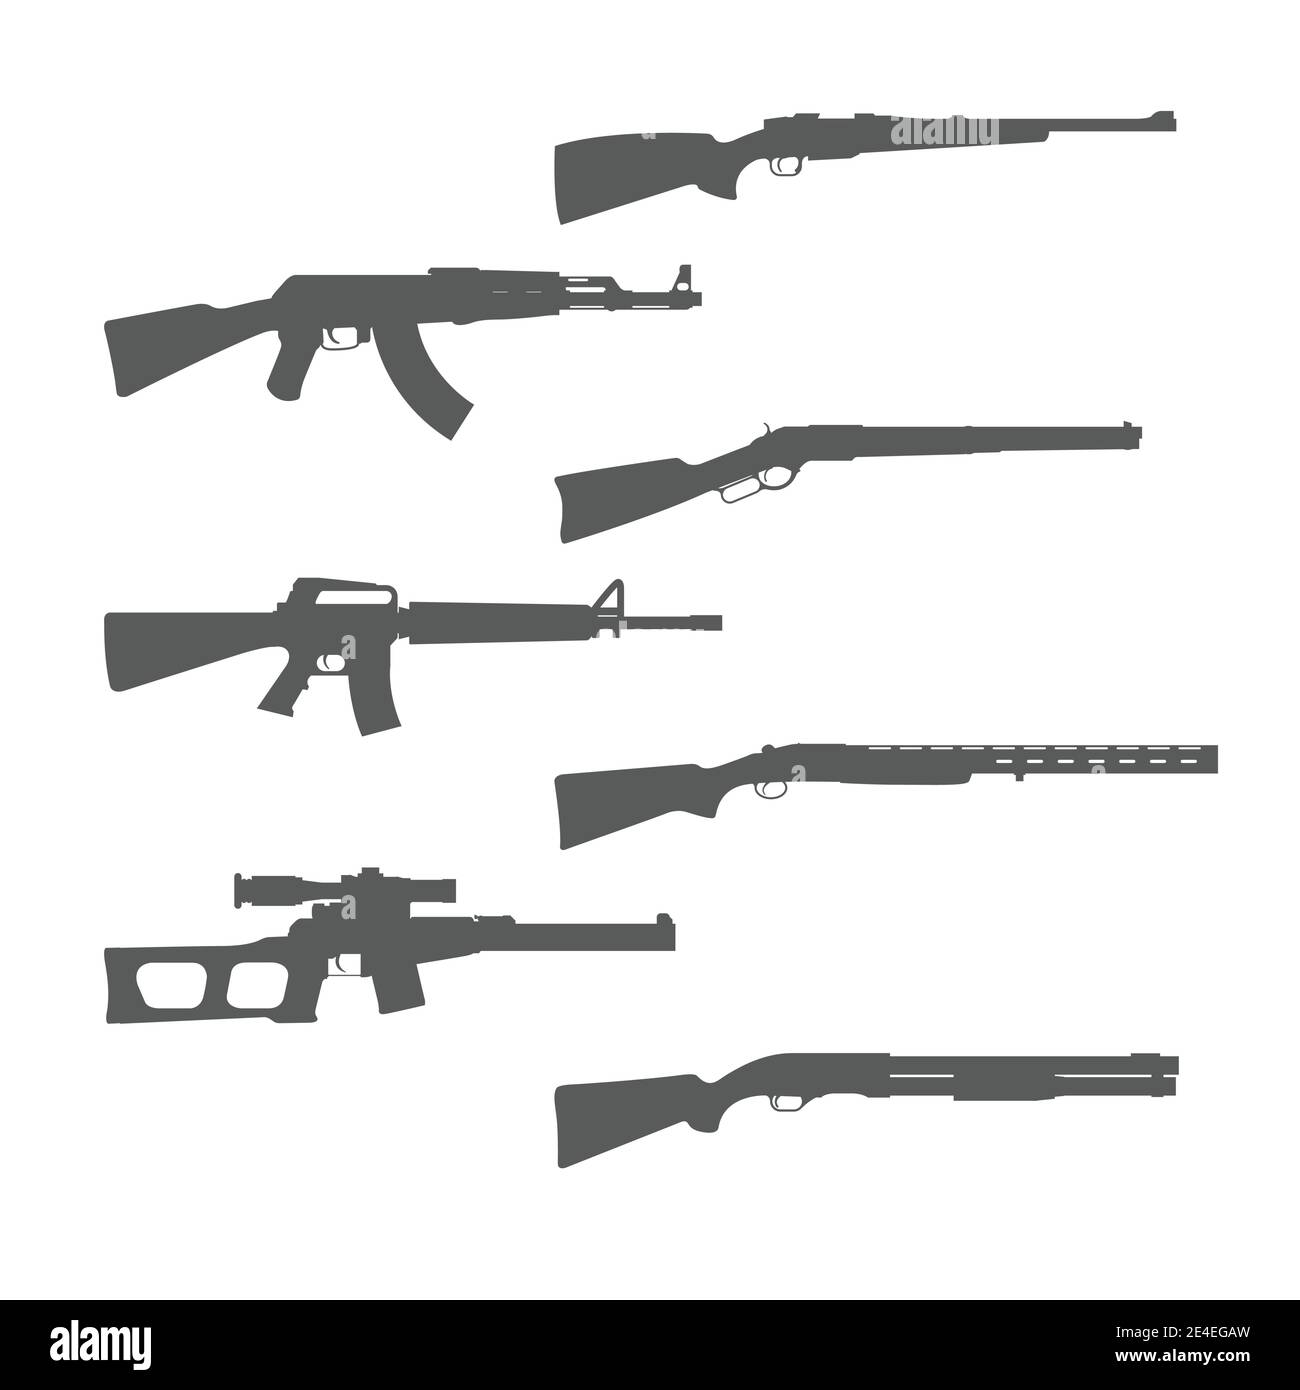 Firearms silhouettes collection, shotgun, m16 rifle and hunt handgun, guns and weapons, vector Stock Vector